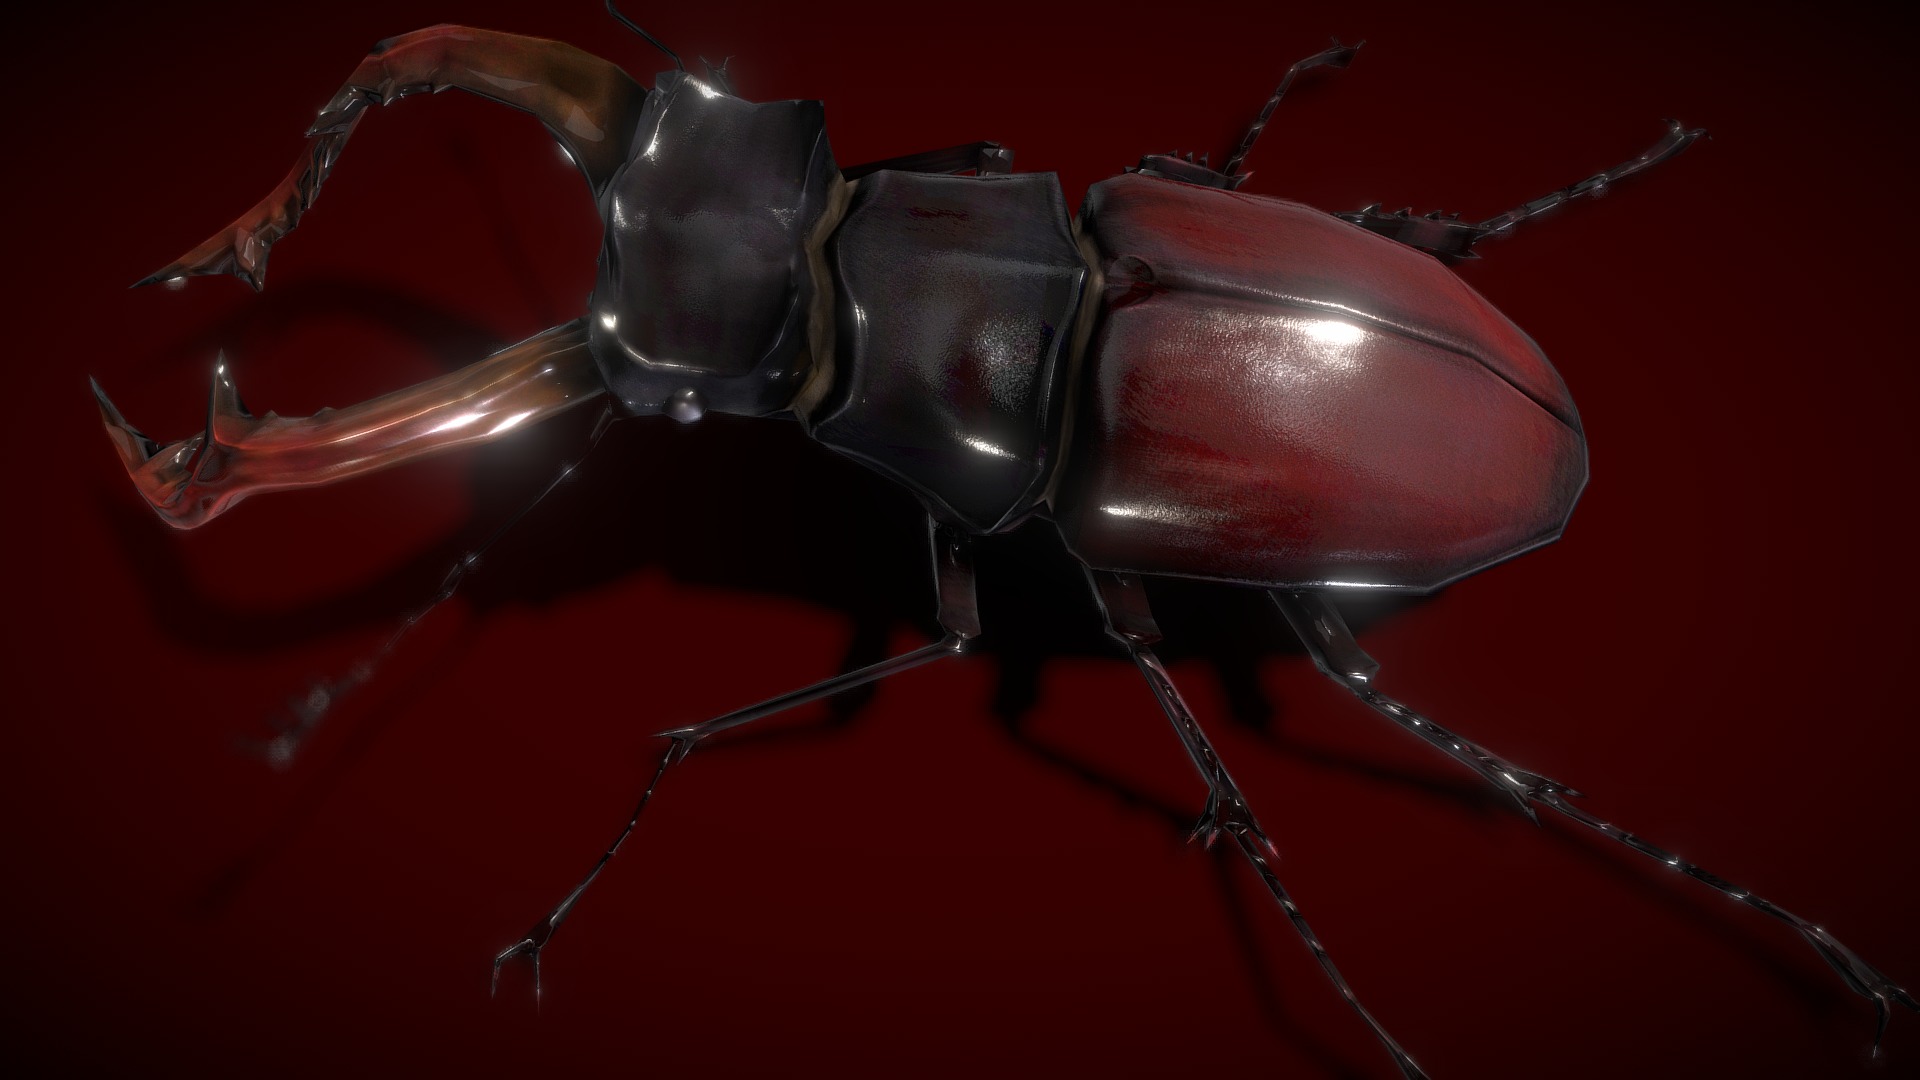 3D model Stag Beetle Lowpolys 3D - This is a 3D model of the Stag Beetle Lowpolys 3D. The 3D model is about a close-up of a beetle.